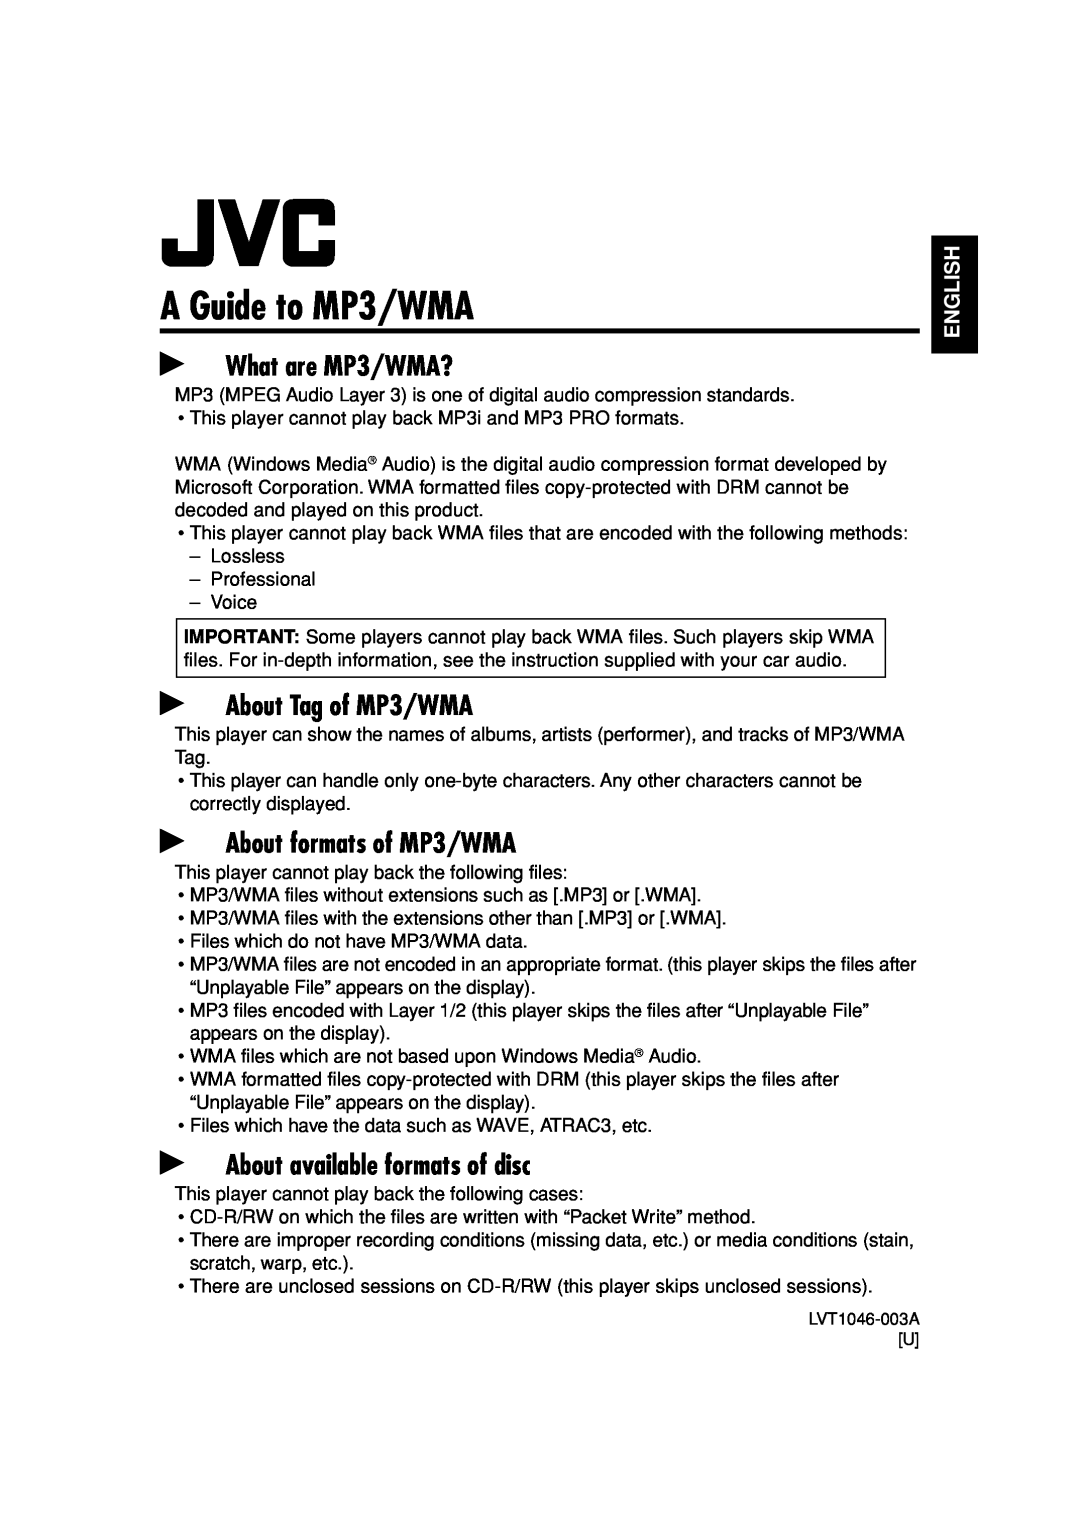 JVC KD-SH9105 manual A Guide to MP3/WMA, What are MP3/WMA?, About Tag of MP3/WMA, About formats of MP3/WMA, English 